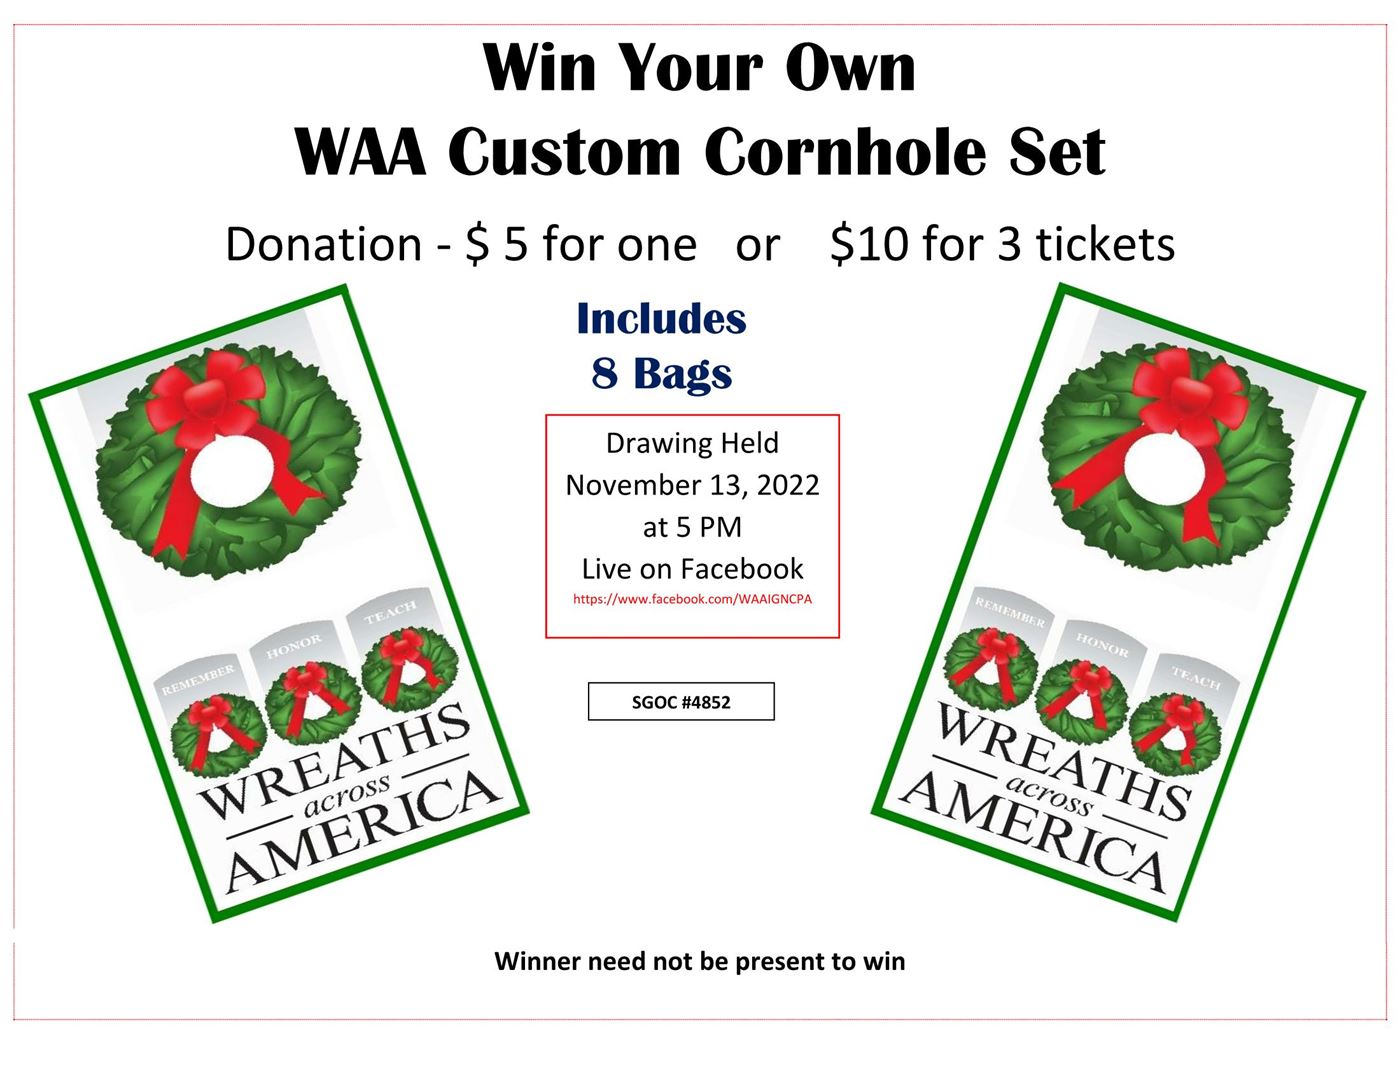 Win a set of custom designed cornhole boards.
To get your chances, email info@waa-ignc.org